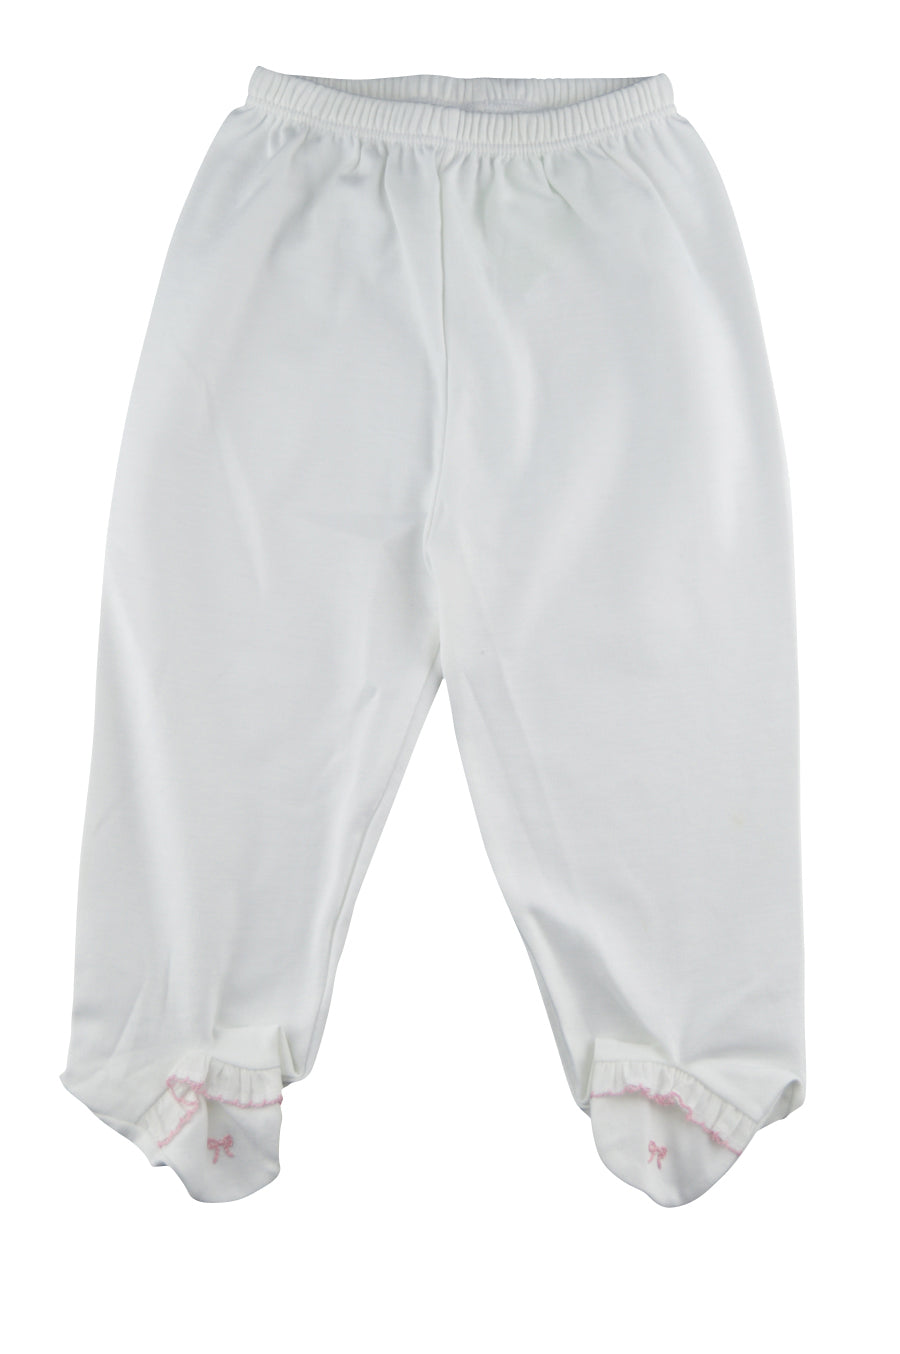 Baby Girl's White Bowtie Footie Pants - Little Threads Inc. Children's Clothing